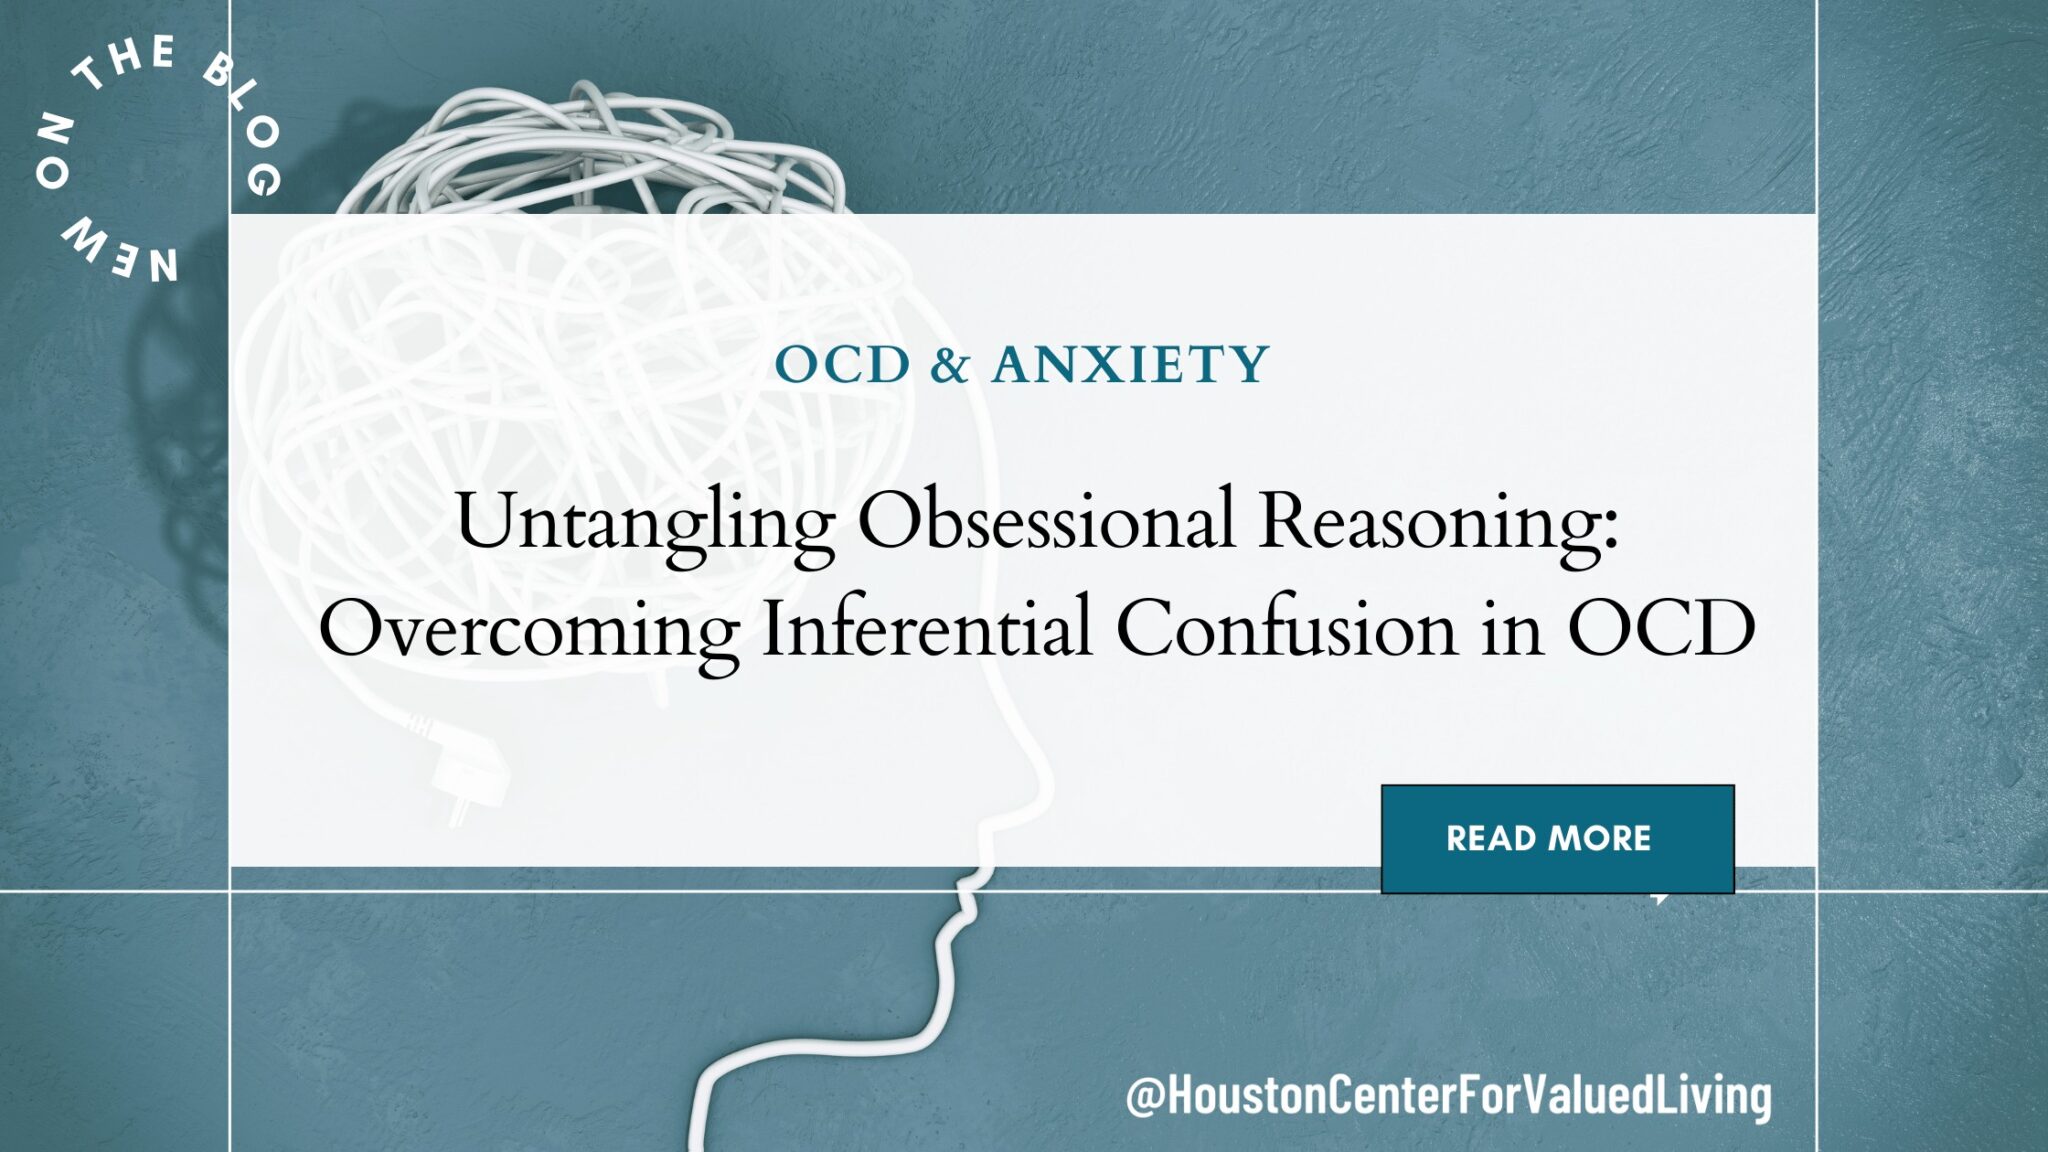 Untangling Obsessional Reasoning: Overcoming Inferential Confusion in OCD